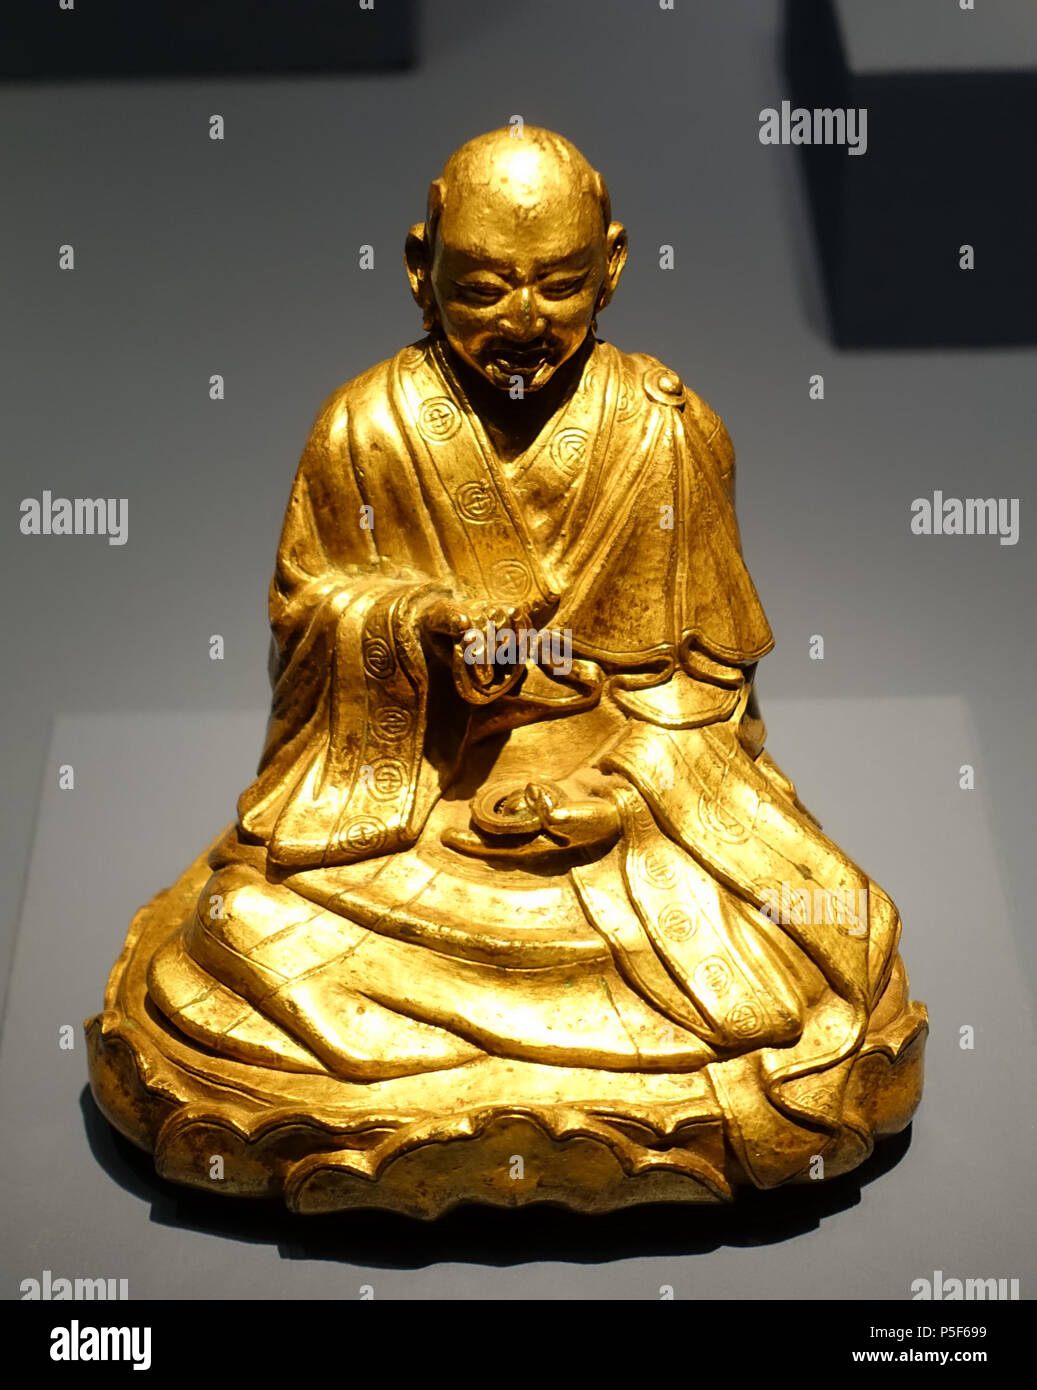 N/A. English: Exhibit in the Linden-Museum - Stuttgart, Germany. 6 December 2015, 12:05:43. Daderot 122 Arhat Kalika, Tibet in a Chinese style, c. 16th-17th century AD, firegilt bronze - Linden-Museum - Stuttgart, Germany - DSC03698 Stock Photo